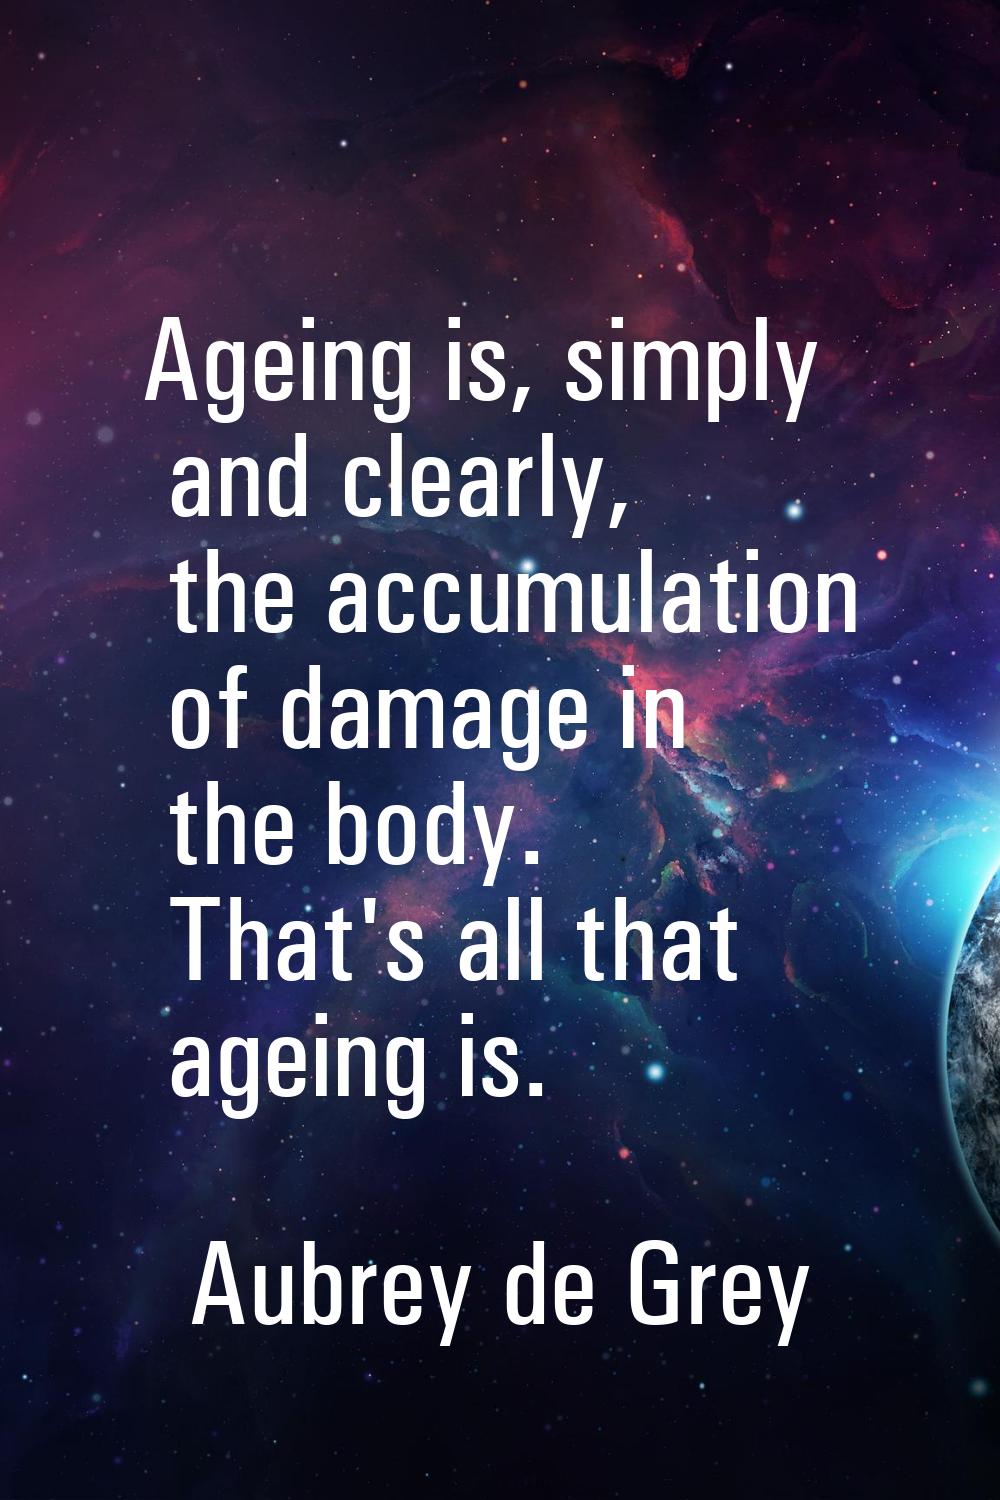 Ageing is, simply and clearly, the accumulation of damage in the body. That's all that ageing is.